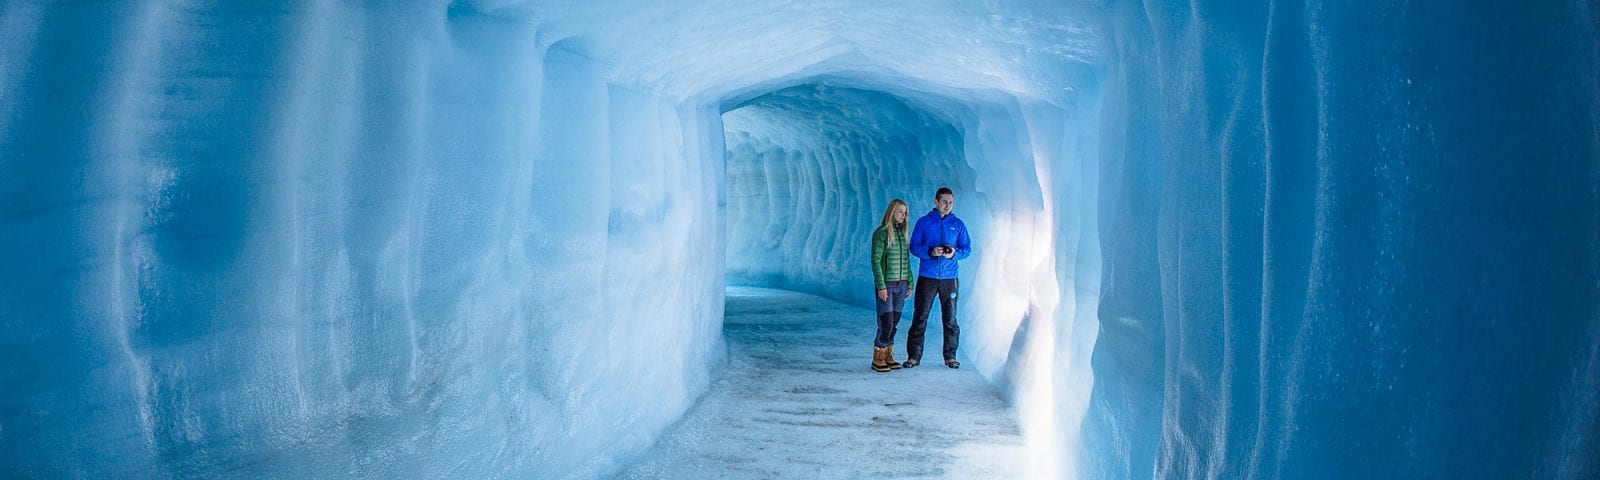 Couple exploring man made ice cave in Iceland